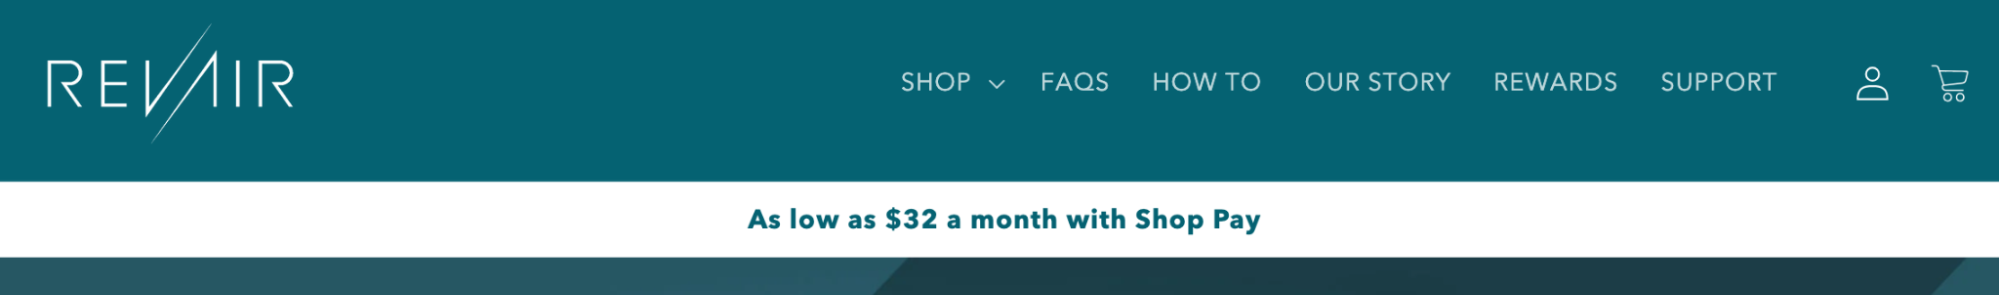 banner from Shopify merchant showing BNPL payments using Shop Pay